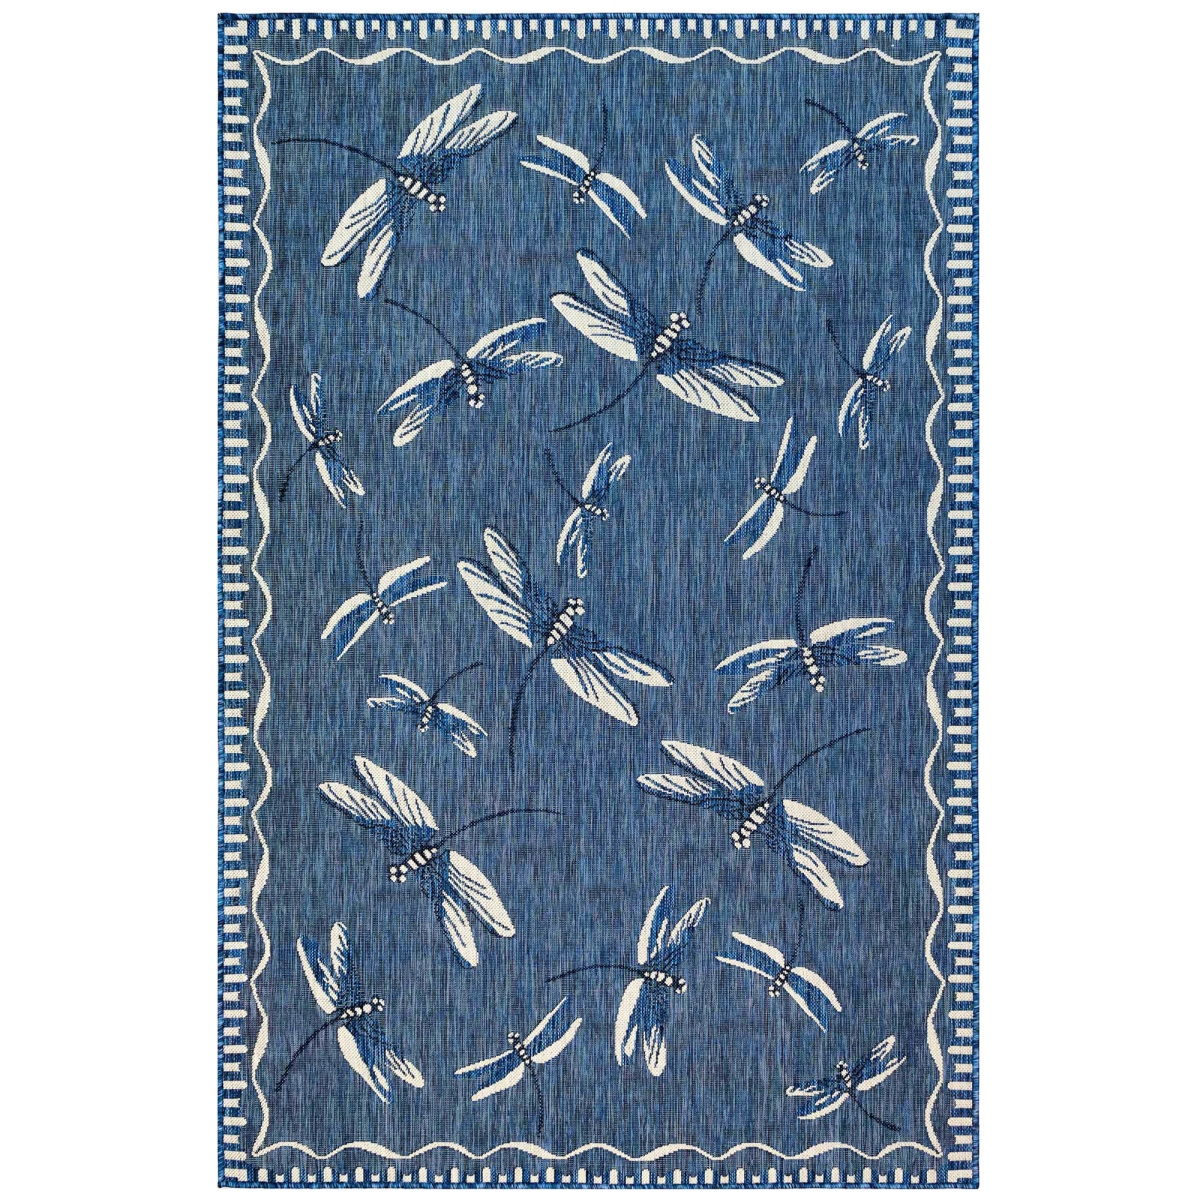 Trans-ocean Imports Cre58844033 Liora Manne Carmel Dragonfly Indoor & Outdoor Rug, Navy - 4 Ft. 10 In. X 7 Ft. 6 In.